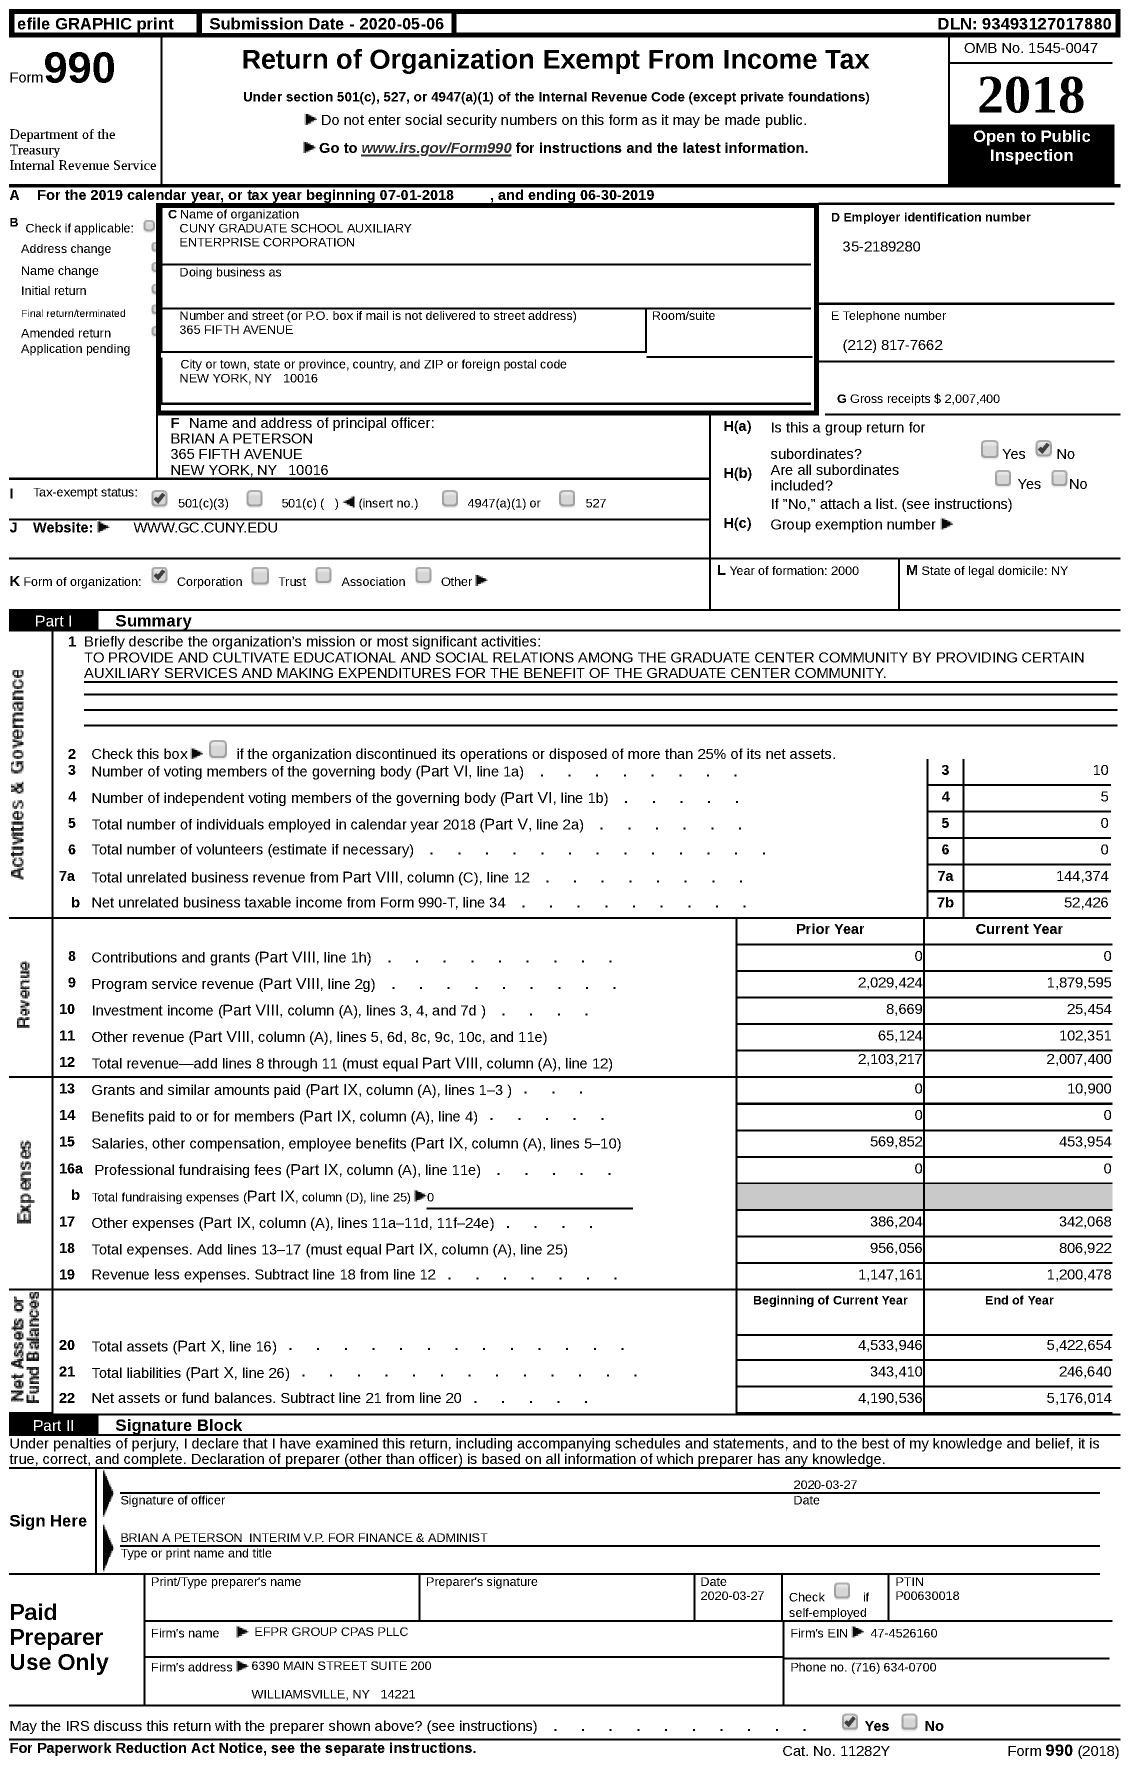 Image of first page of 2018 Form 990 for Graduate Center (GC)